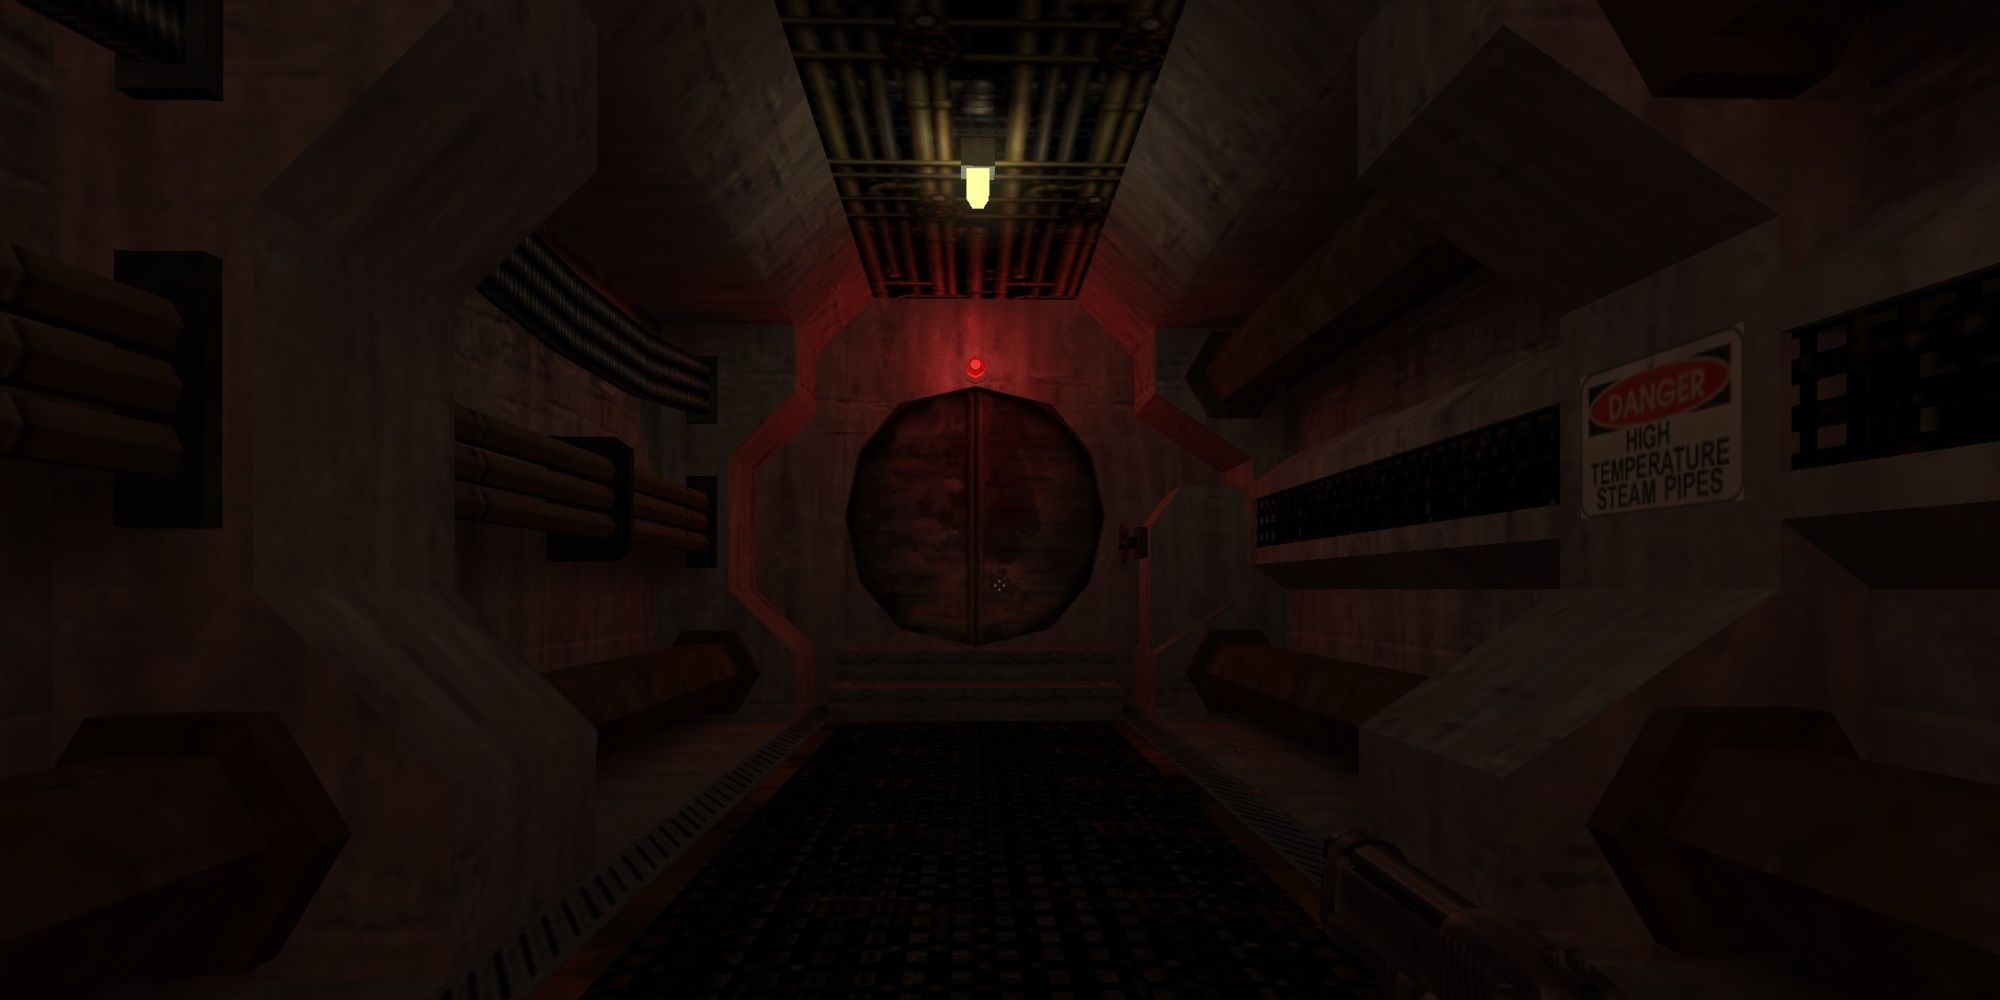 Half Life Blue Shift - An ominous shaft with a sickly red light overhead foretelling of YOUR DOOOOOM